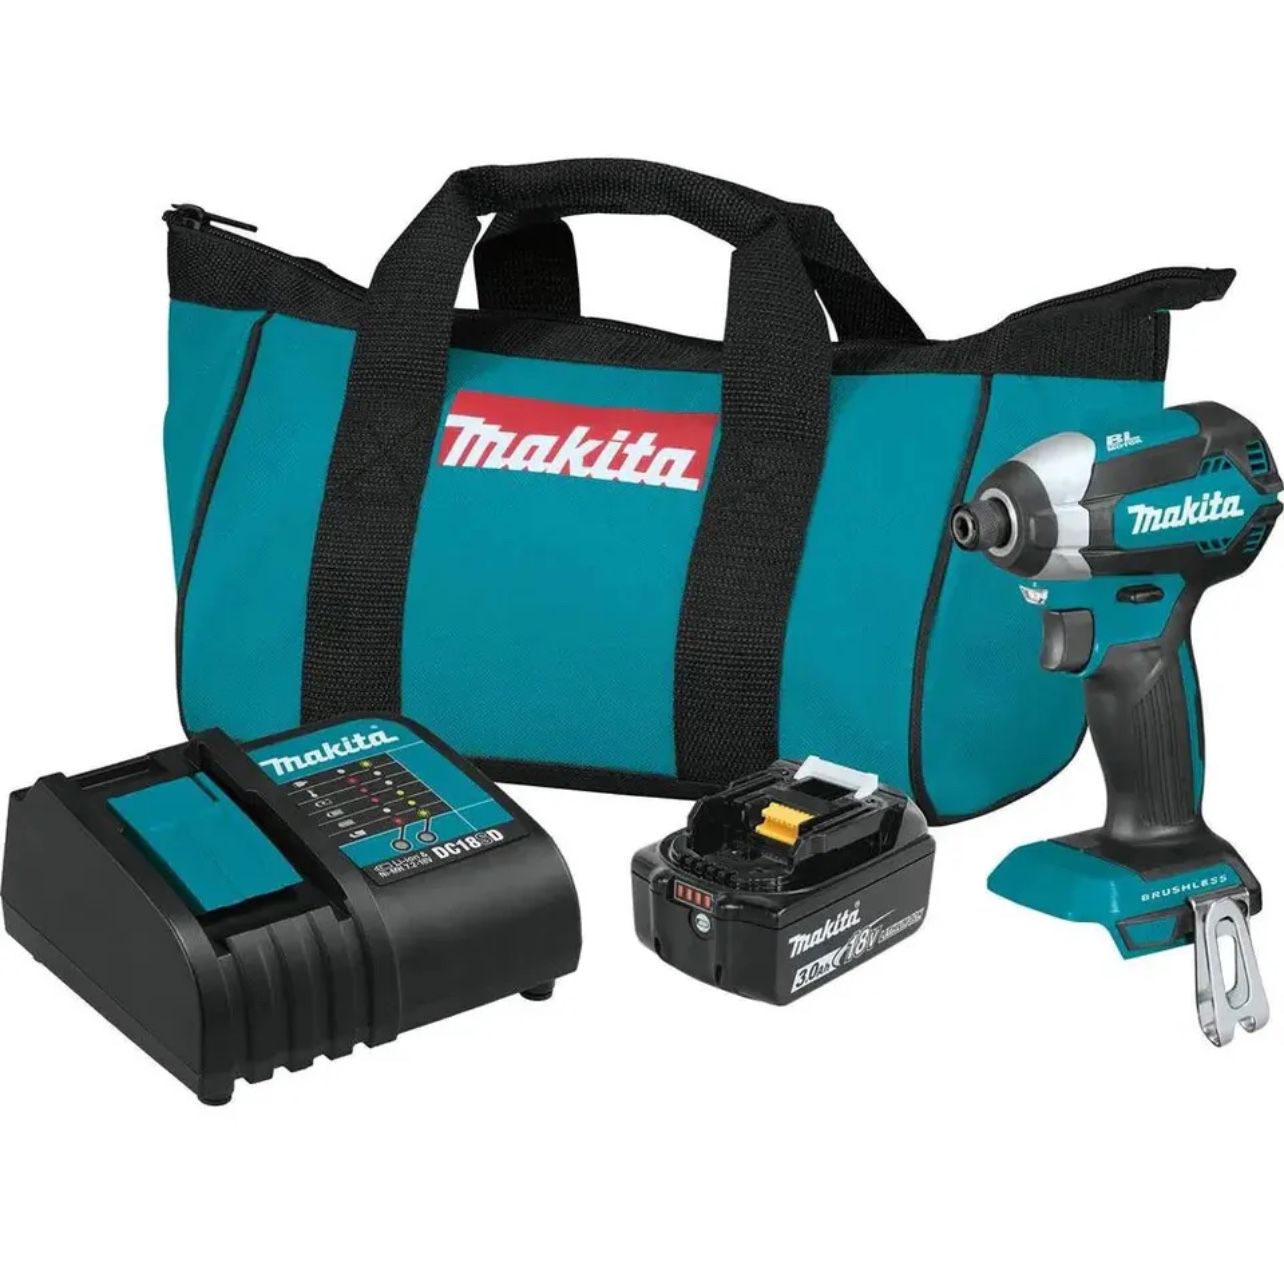  The Makita 18-Volt LXT Lithium-Ion Brushless Cordless Driver-Drill Kit (XFD131) is an ideal drilling and driving solution for the user who wants a dr